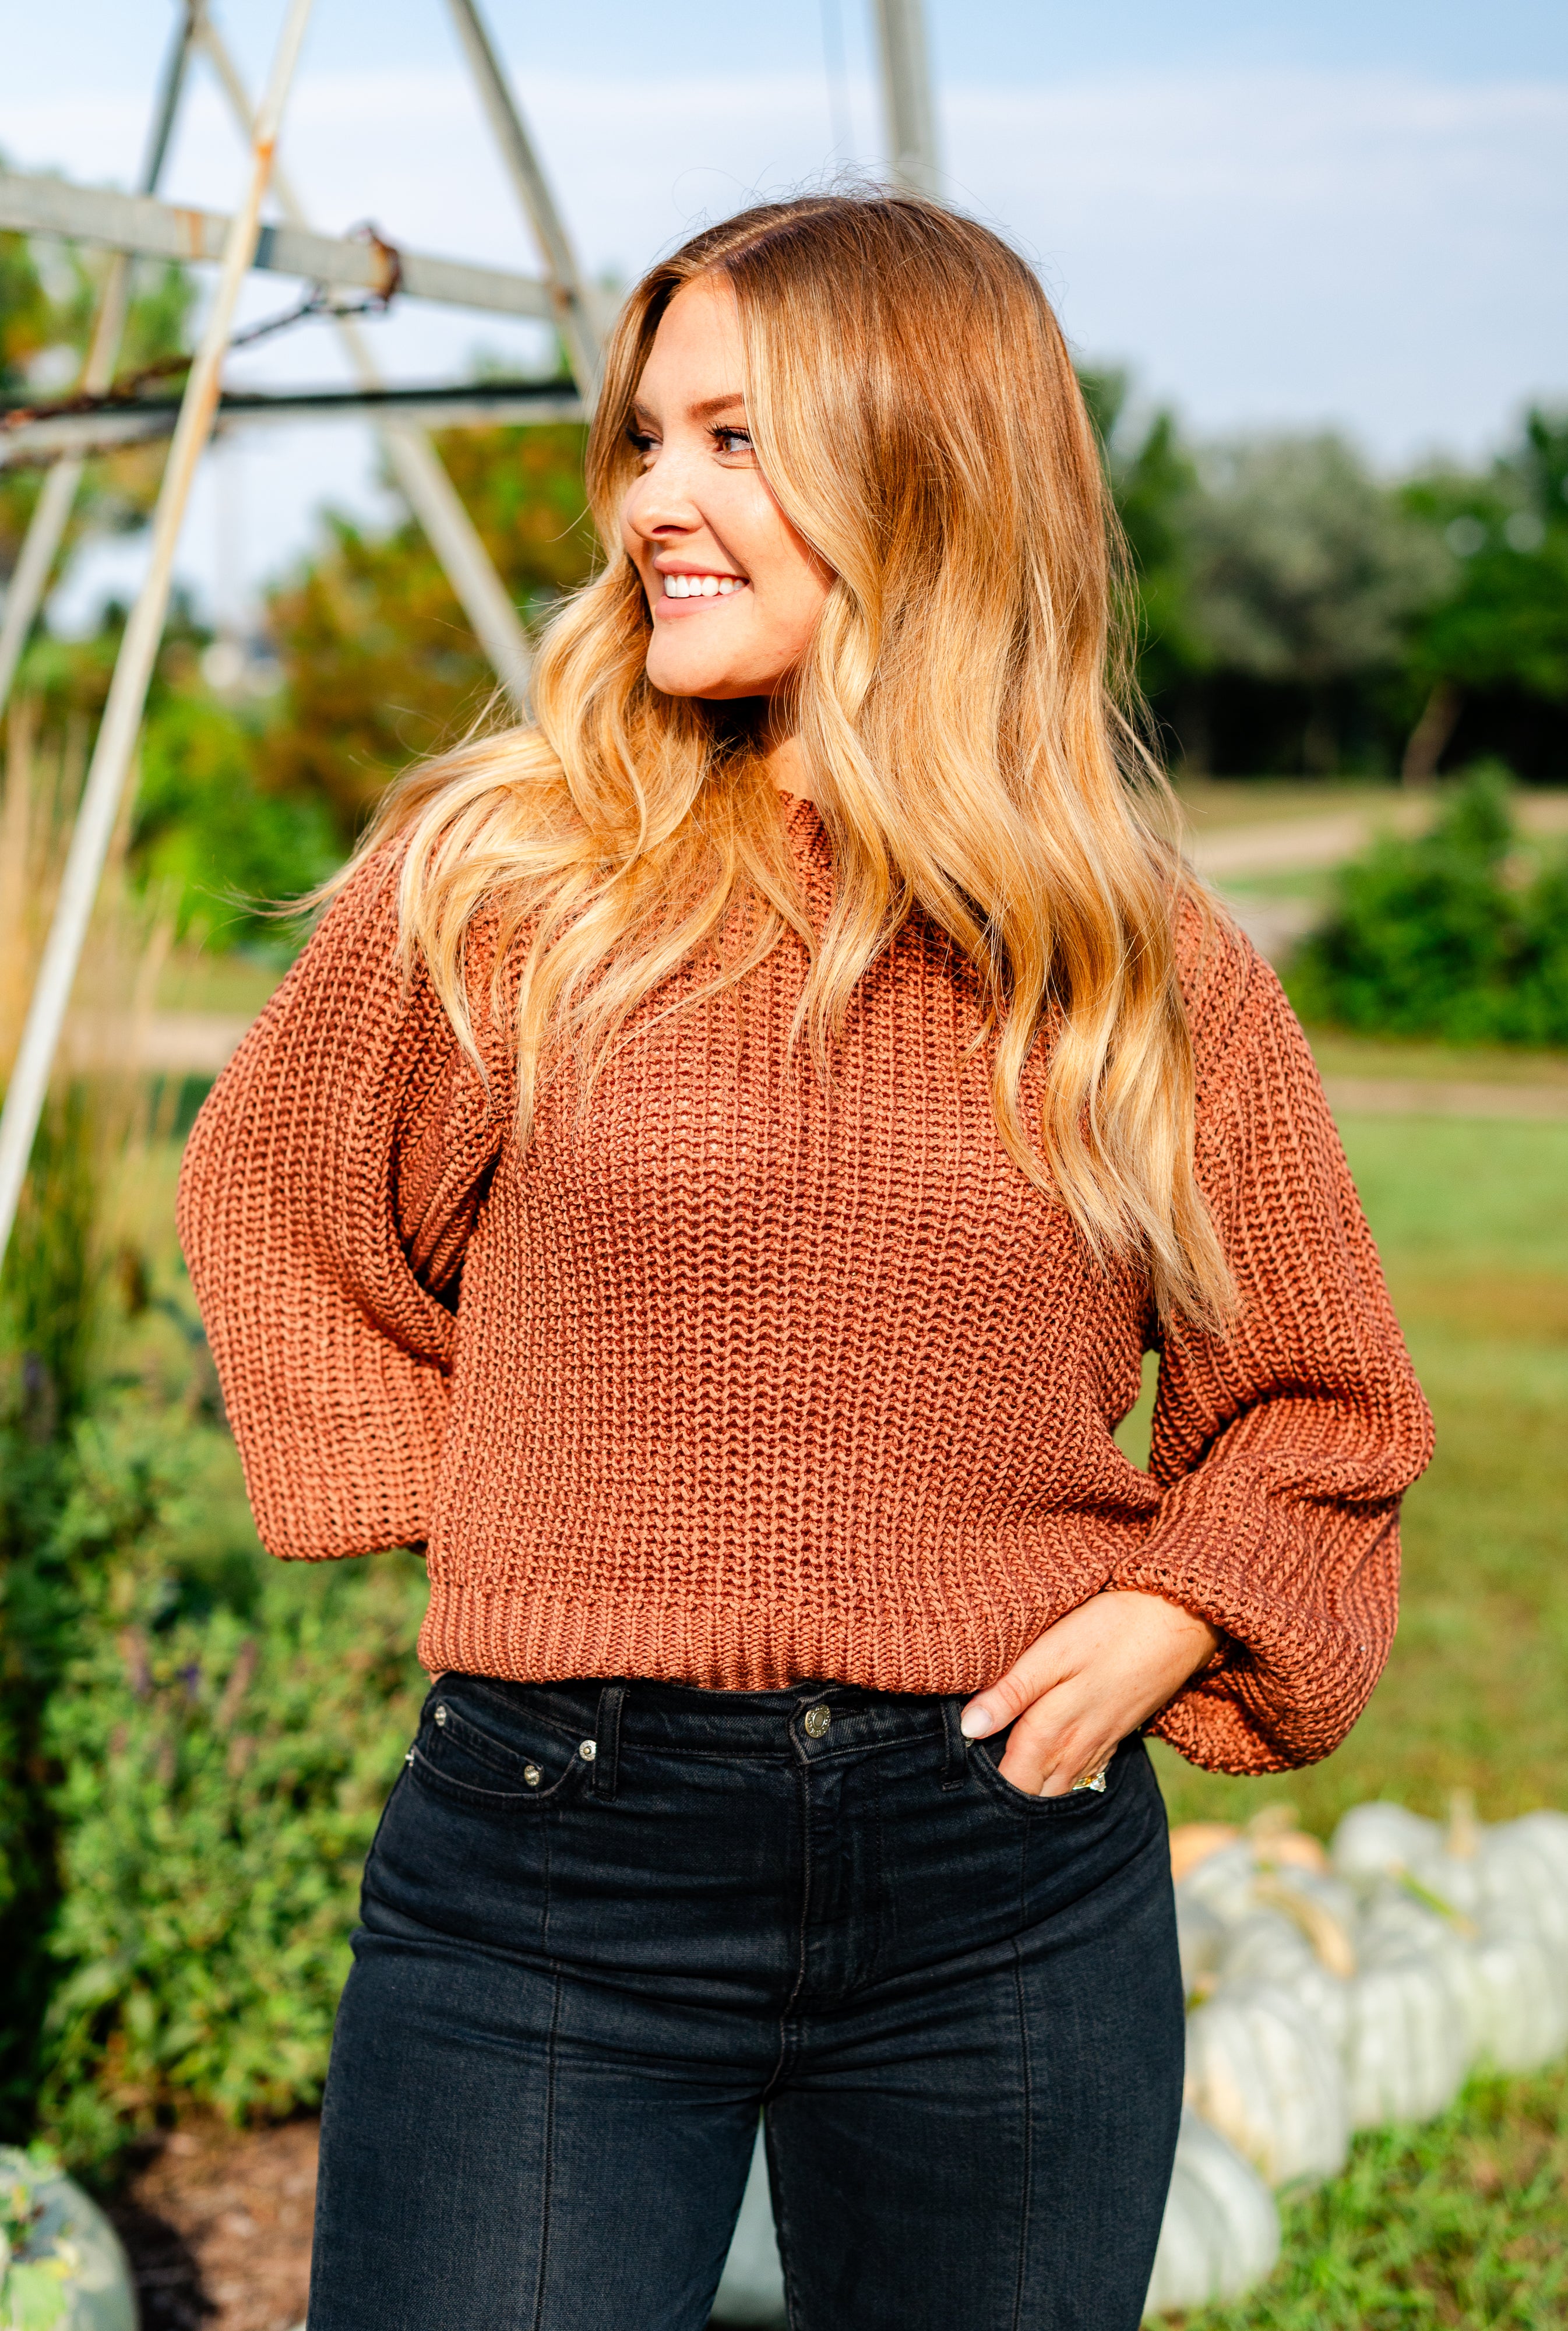 Asheville Pullover Sweater